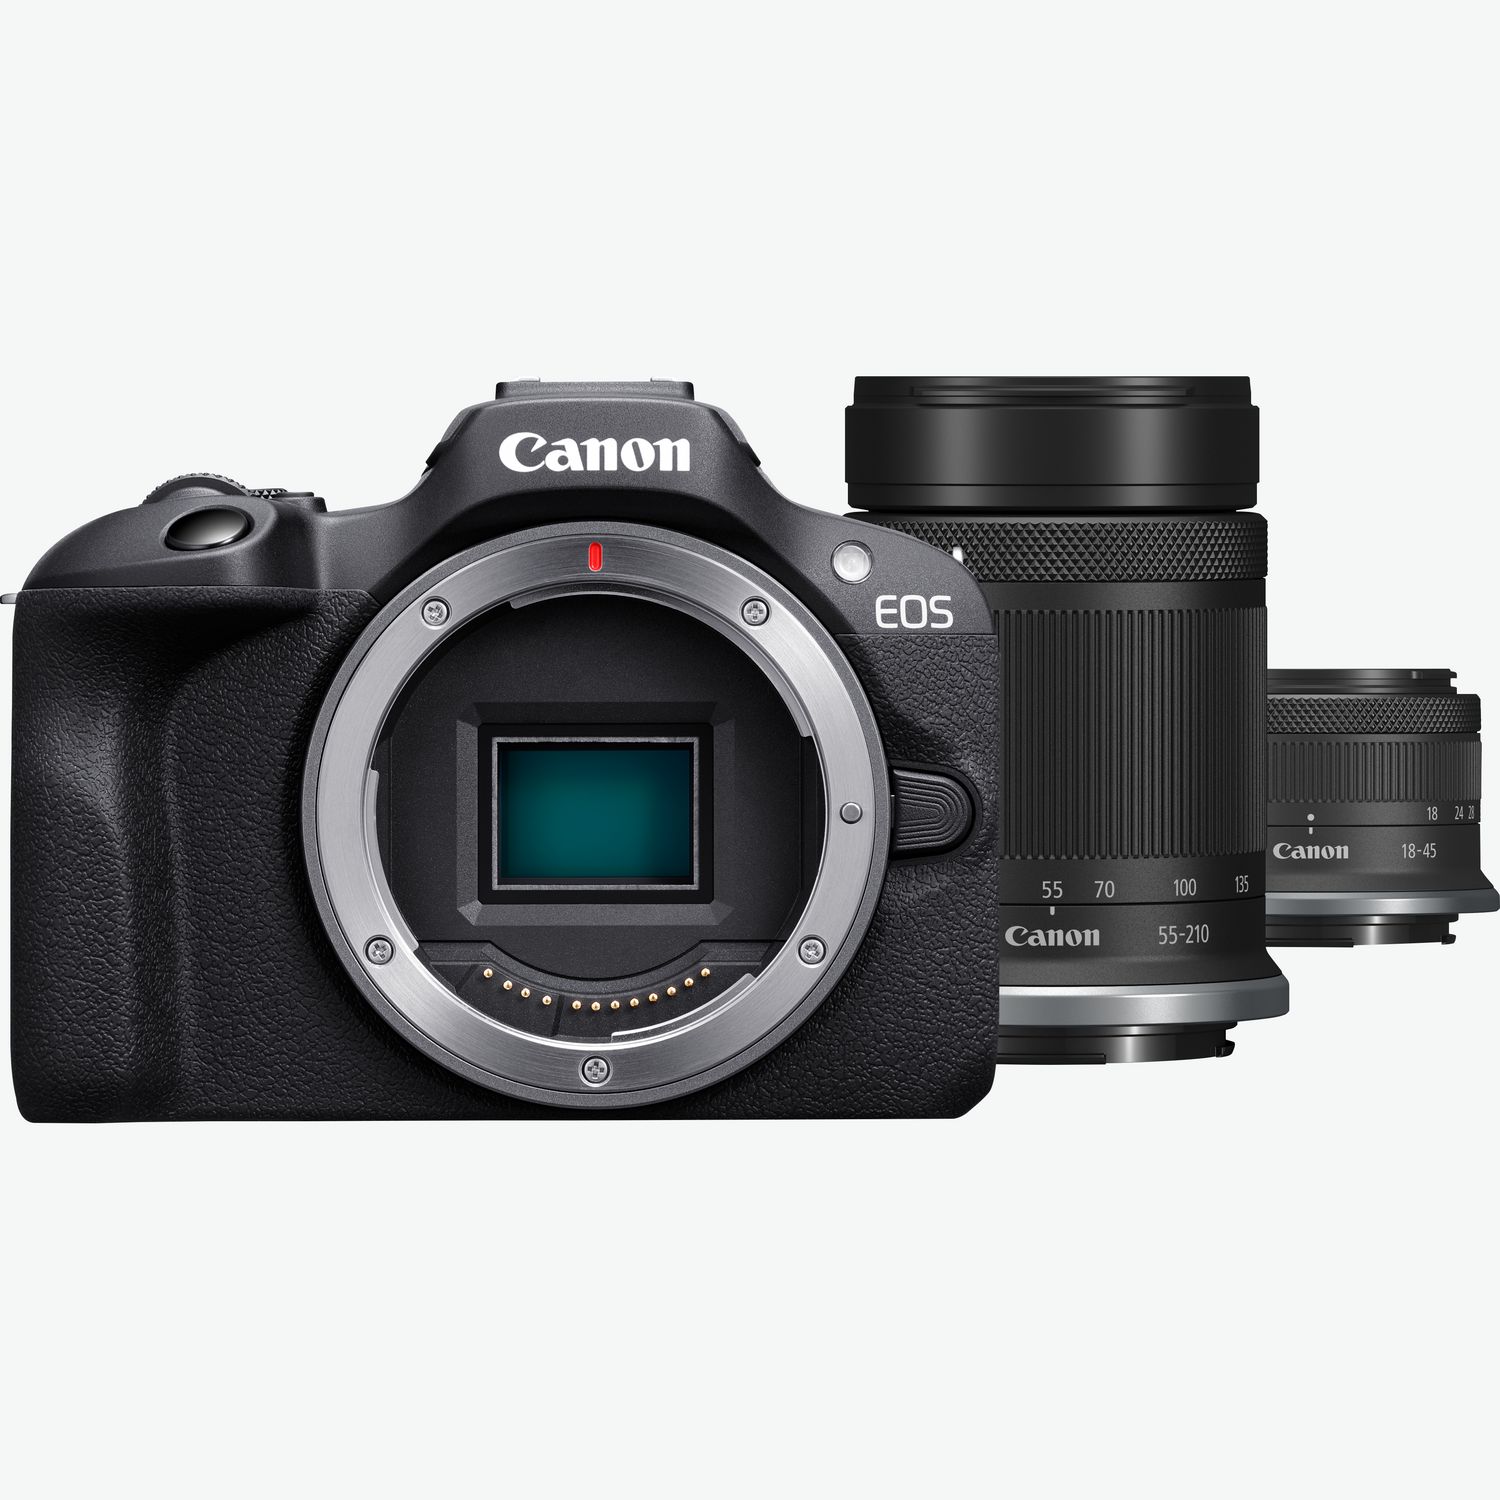 Buy Canon EOS M100 Black + EF-M 15-45mm f/3.5-6.3 IS STM Lens Black in  Discontinued — Canon Ireland Store